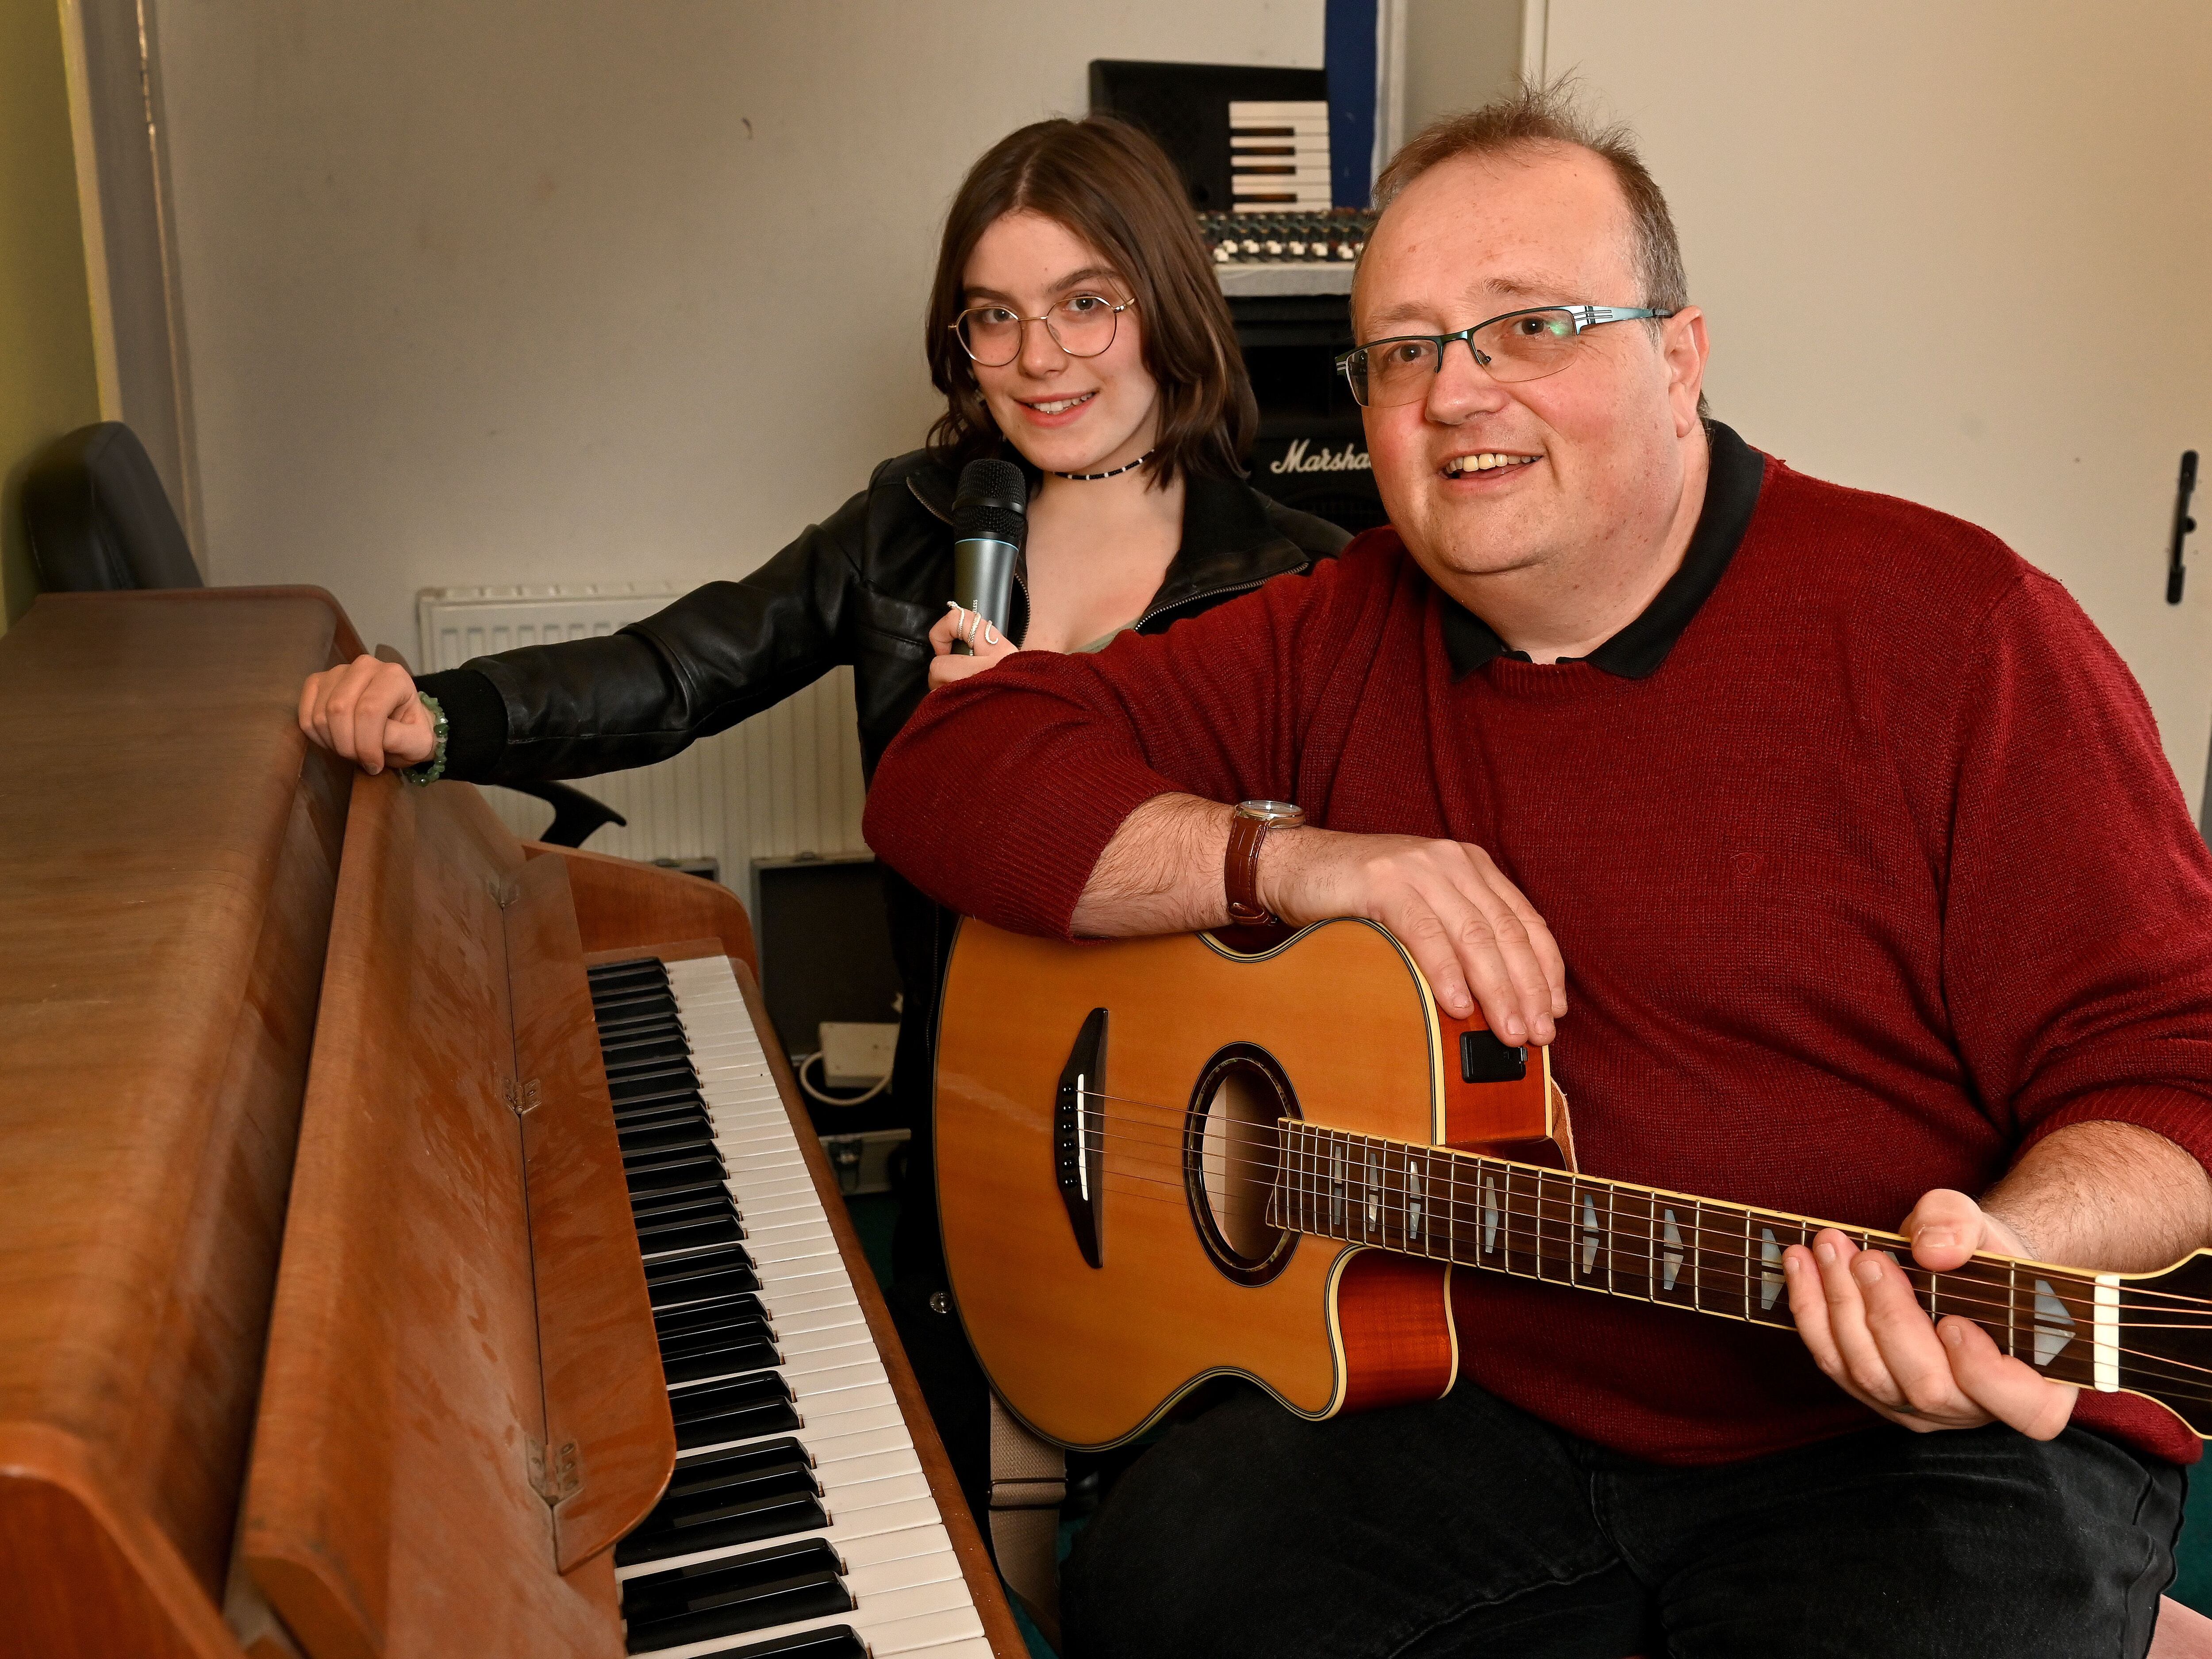 Stafford musicians team up with best selling American author